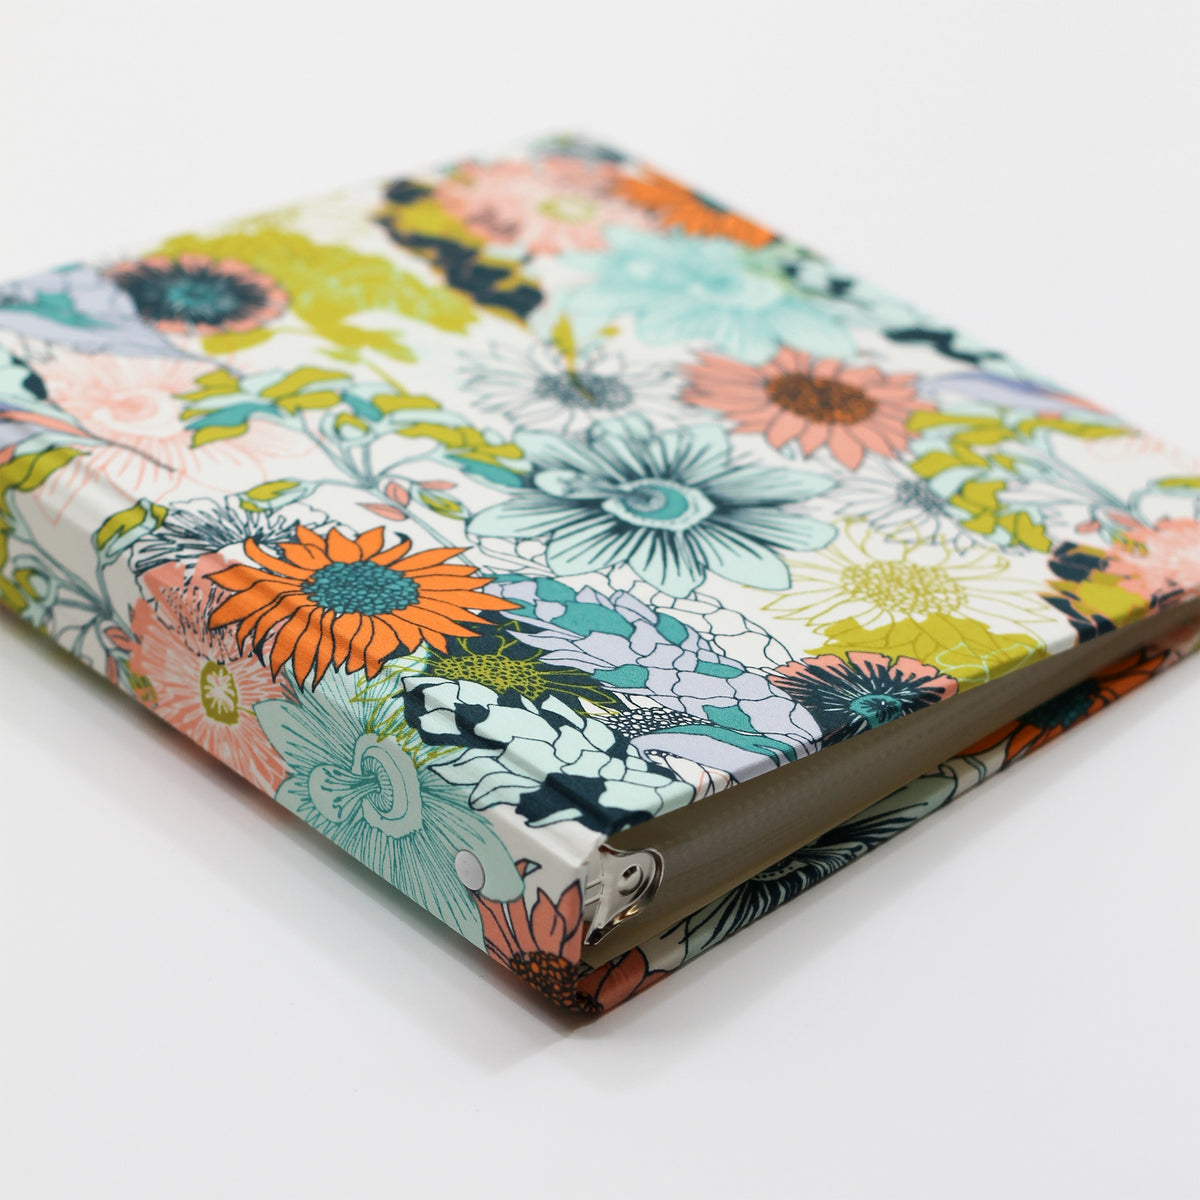 Medium Photo Binder | for 4 x 6 photos | with Retro Floral Cover